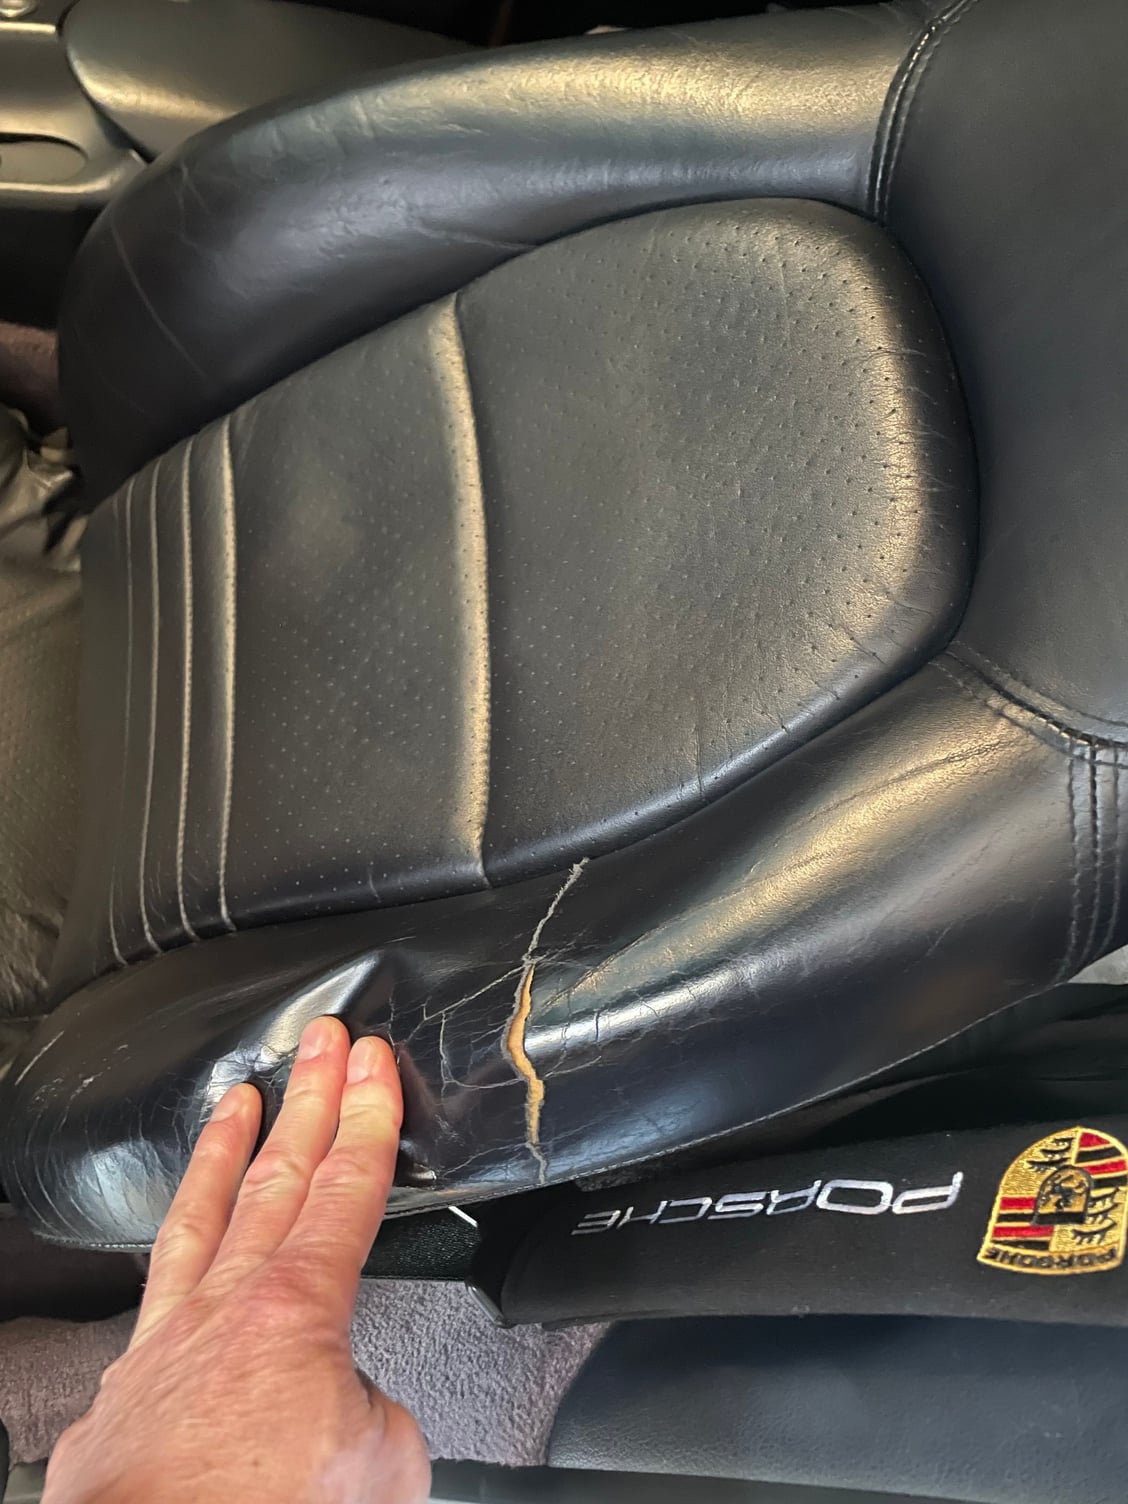 Leather Touch Up, Great Solution - Rennlist - Porsche Discussion Forums